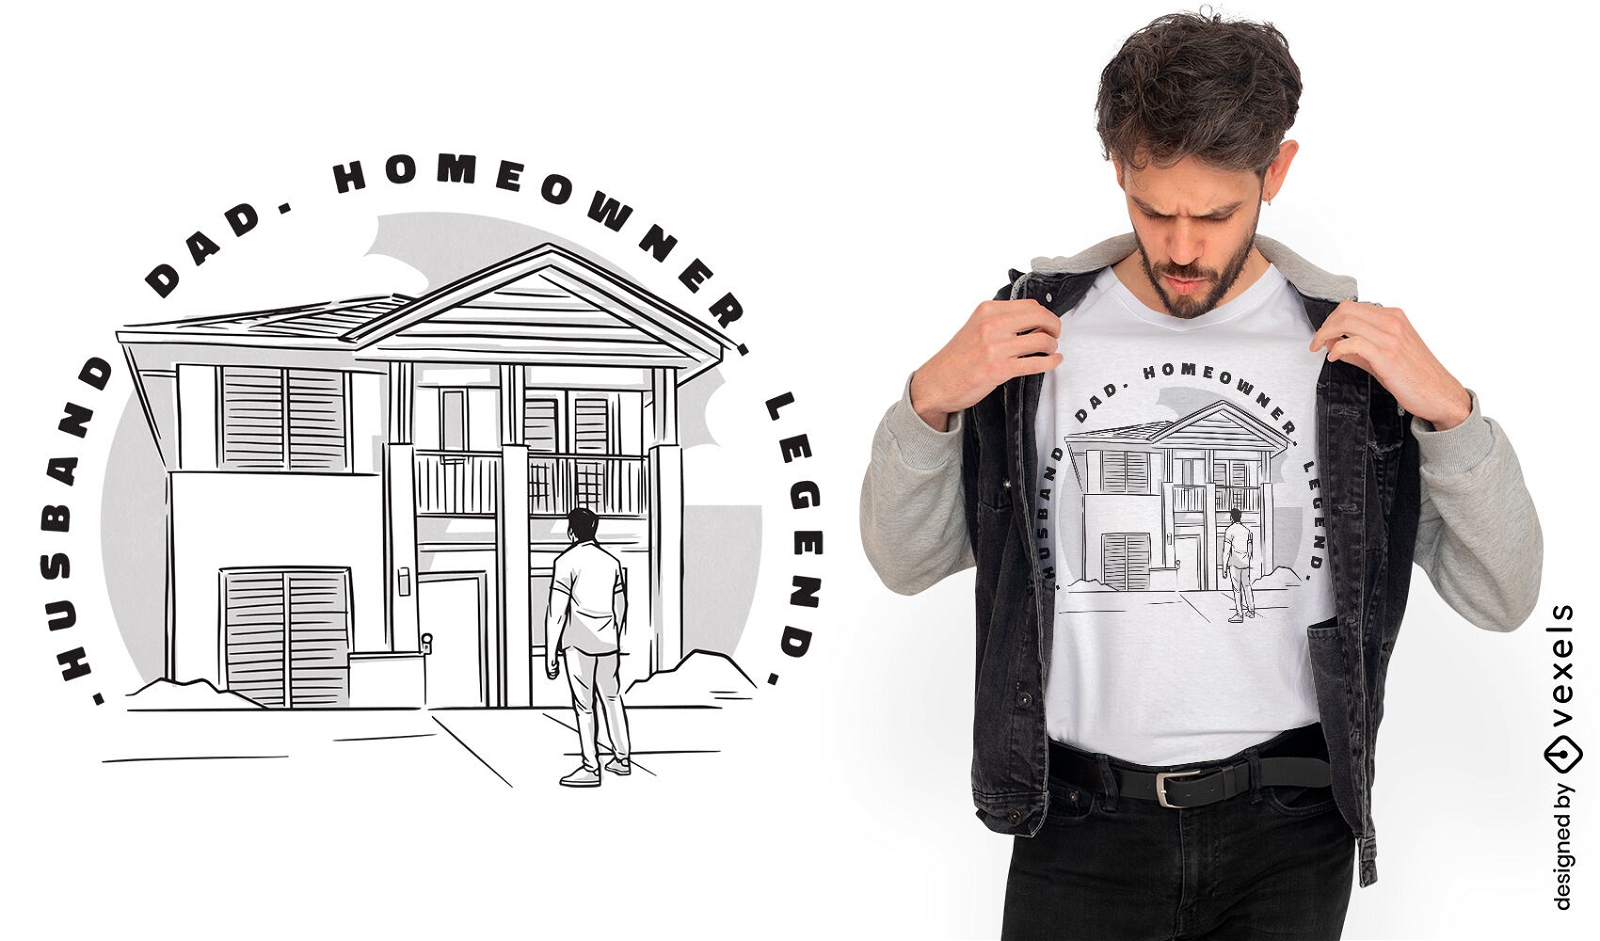 Man with new house t-shirt design